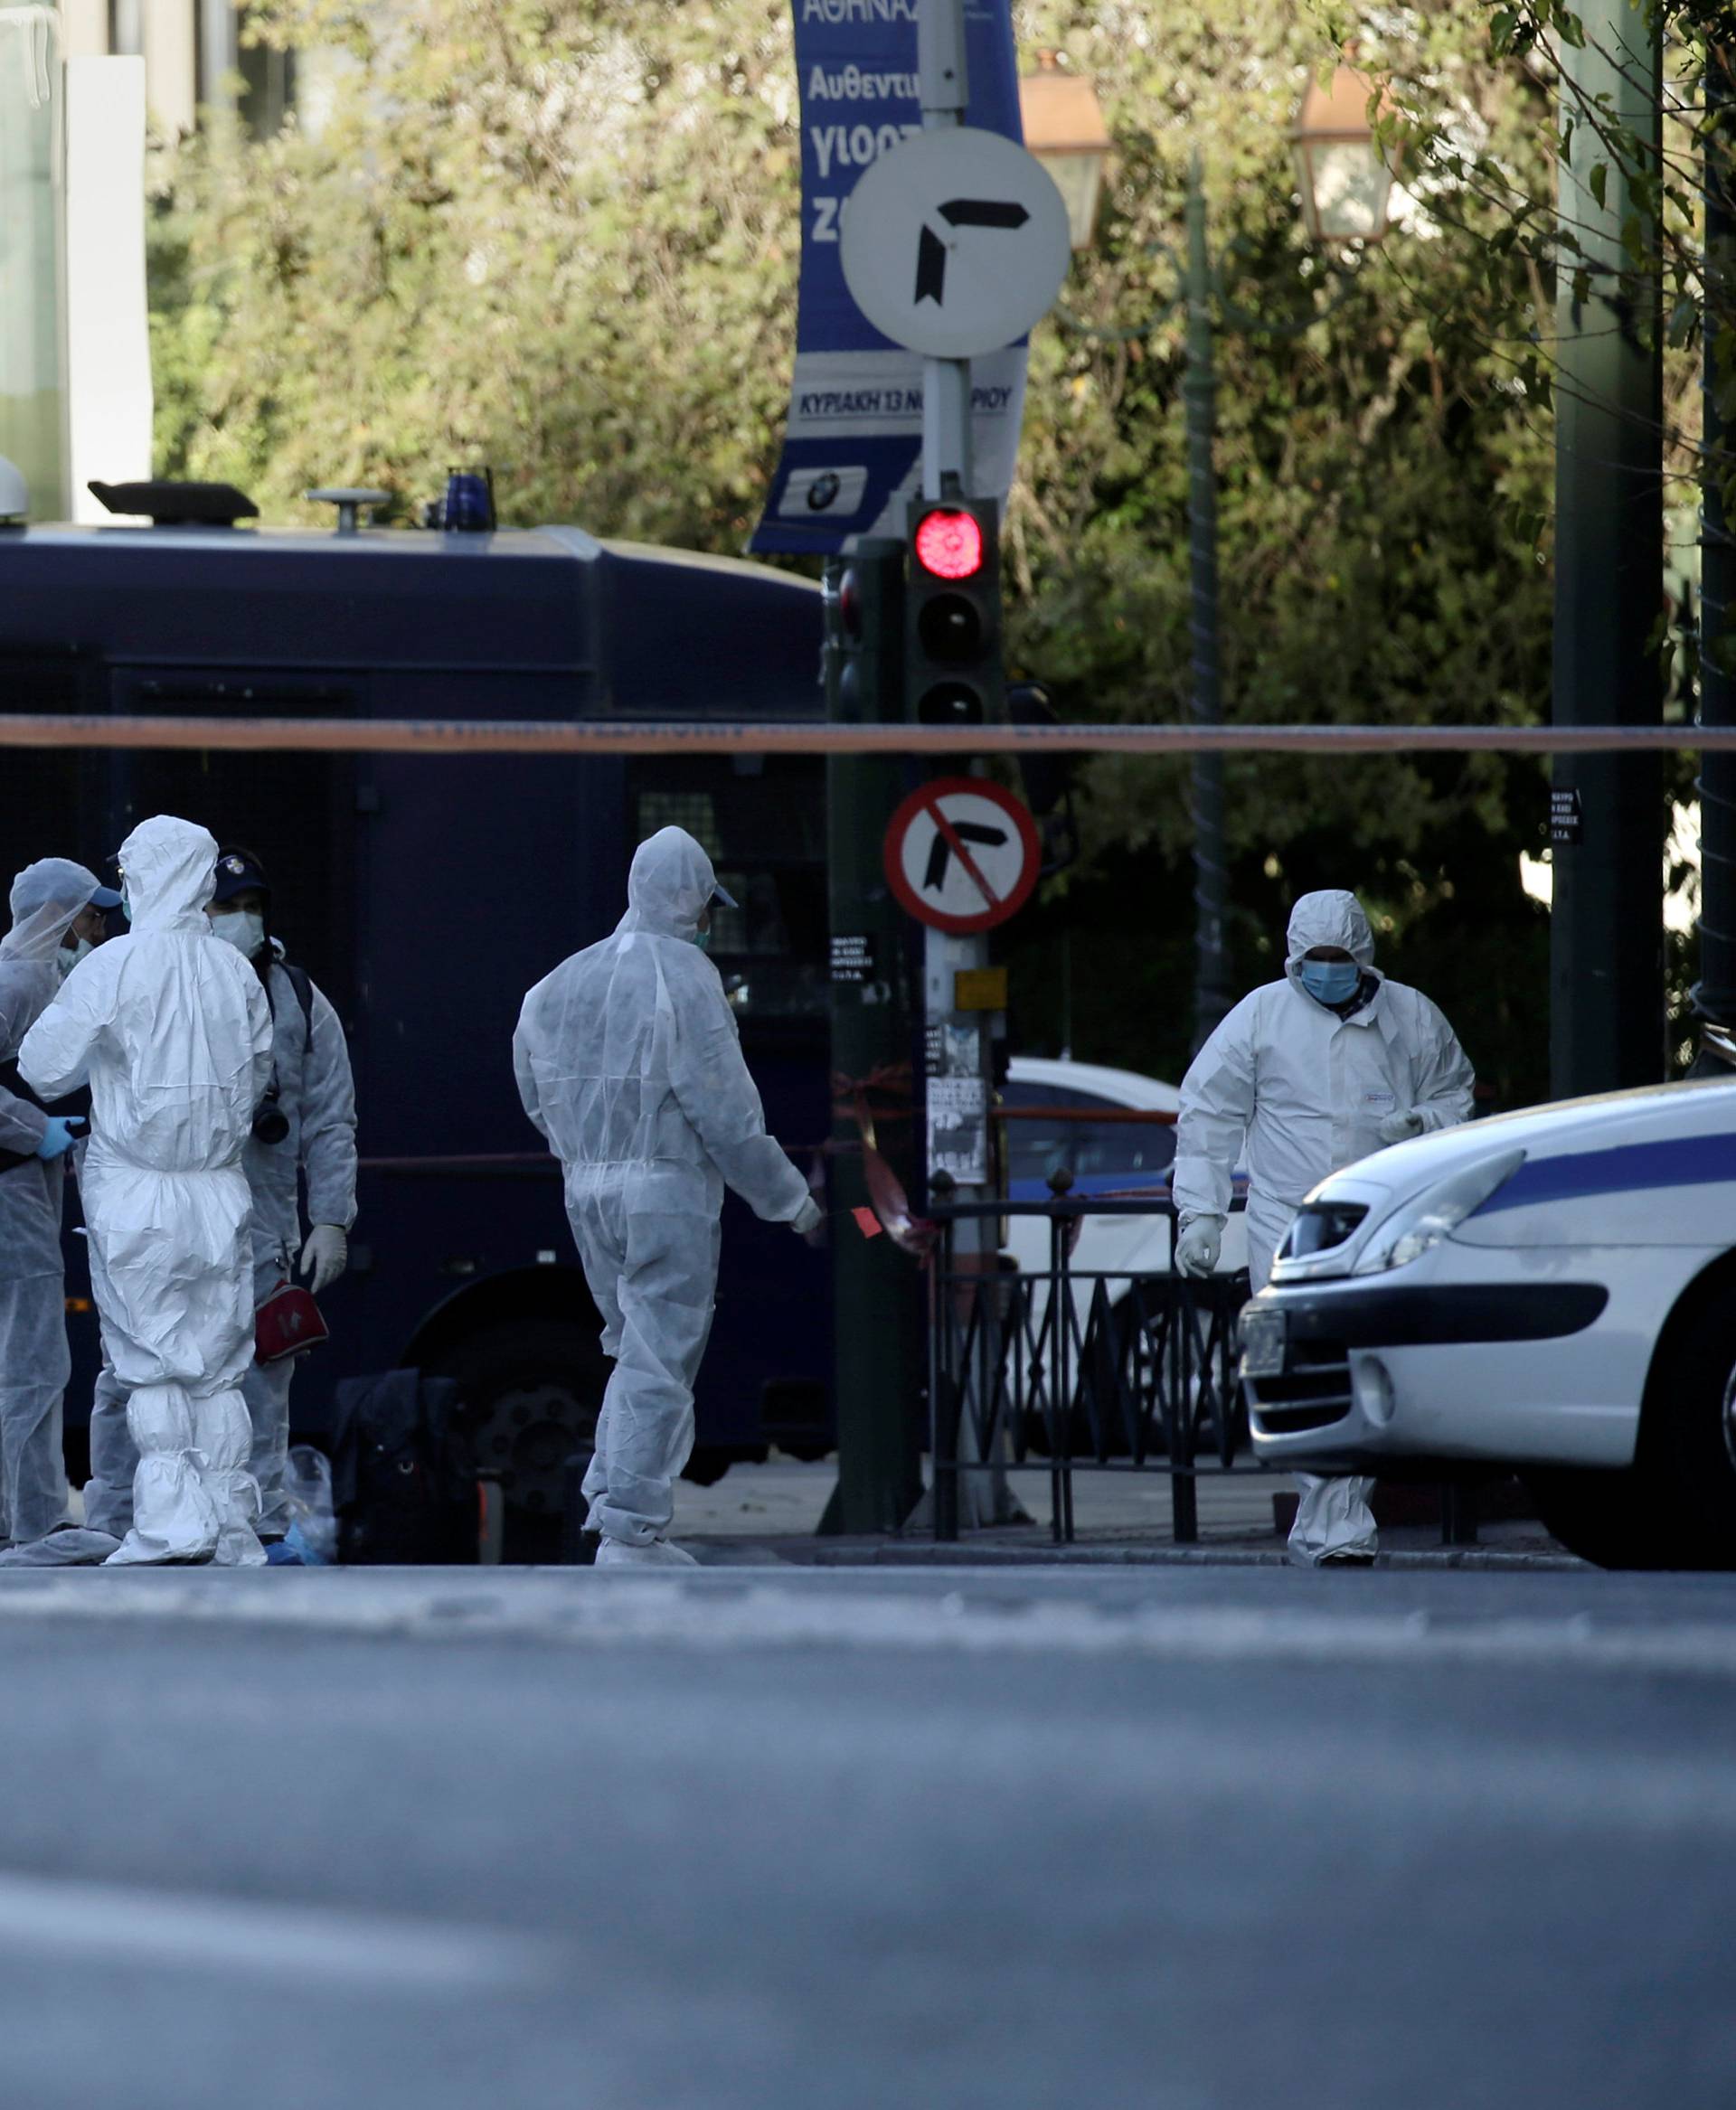 Forensics experts search for evidence outside the French embassy, where unidentified attackers threw an explosive device causing a small blast, in Athens